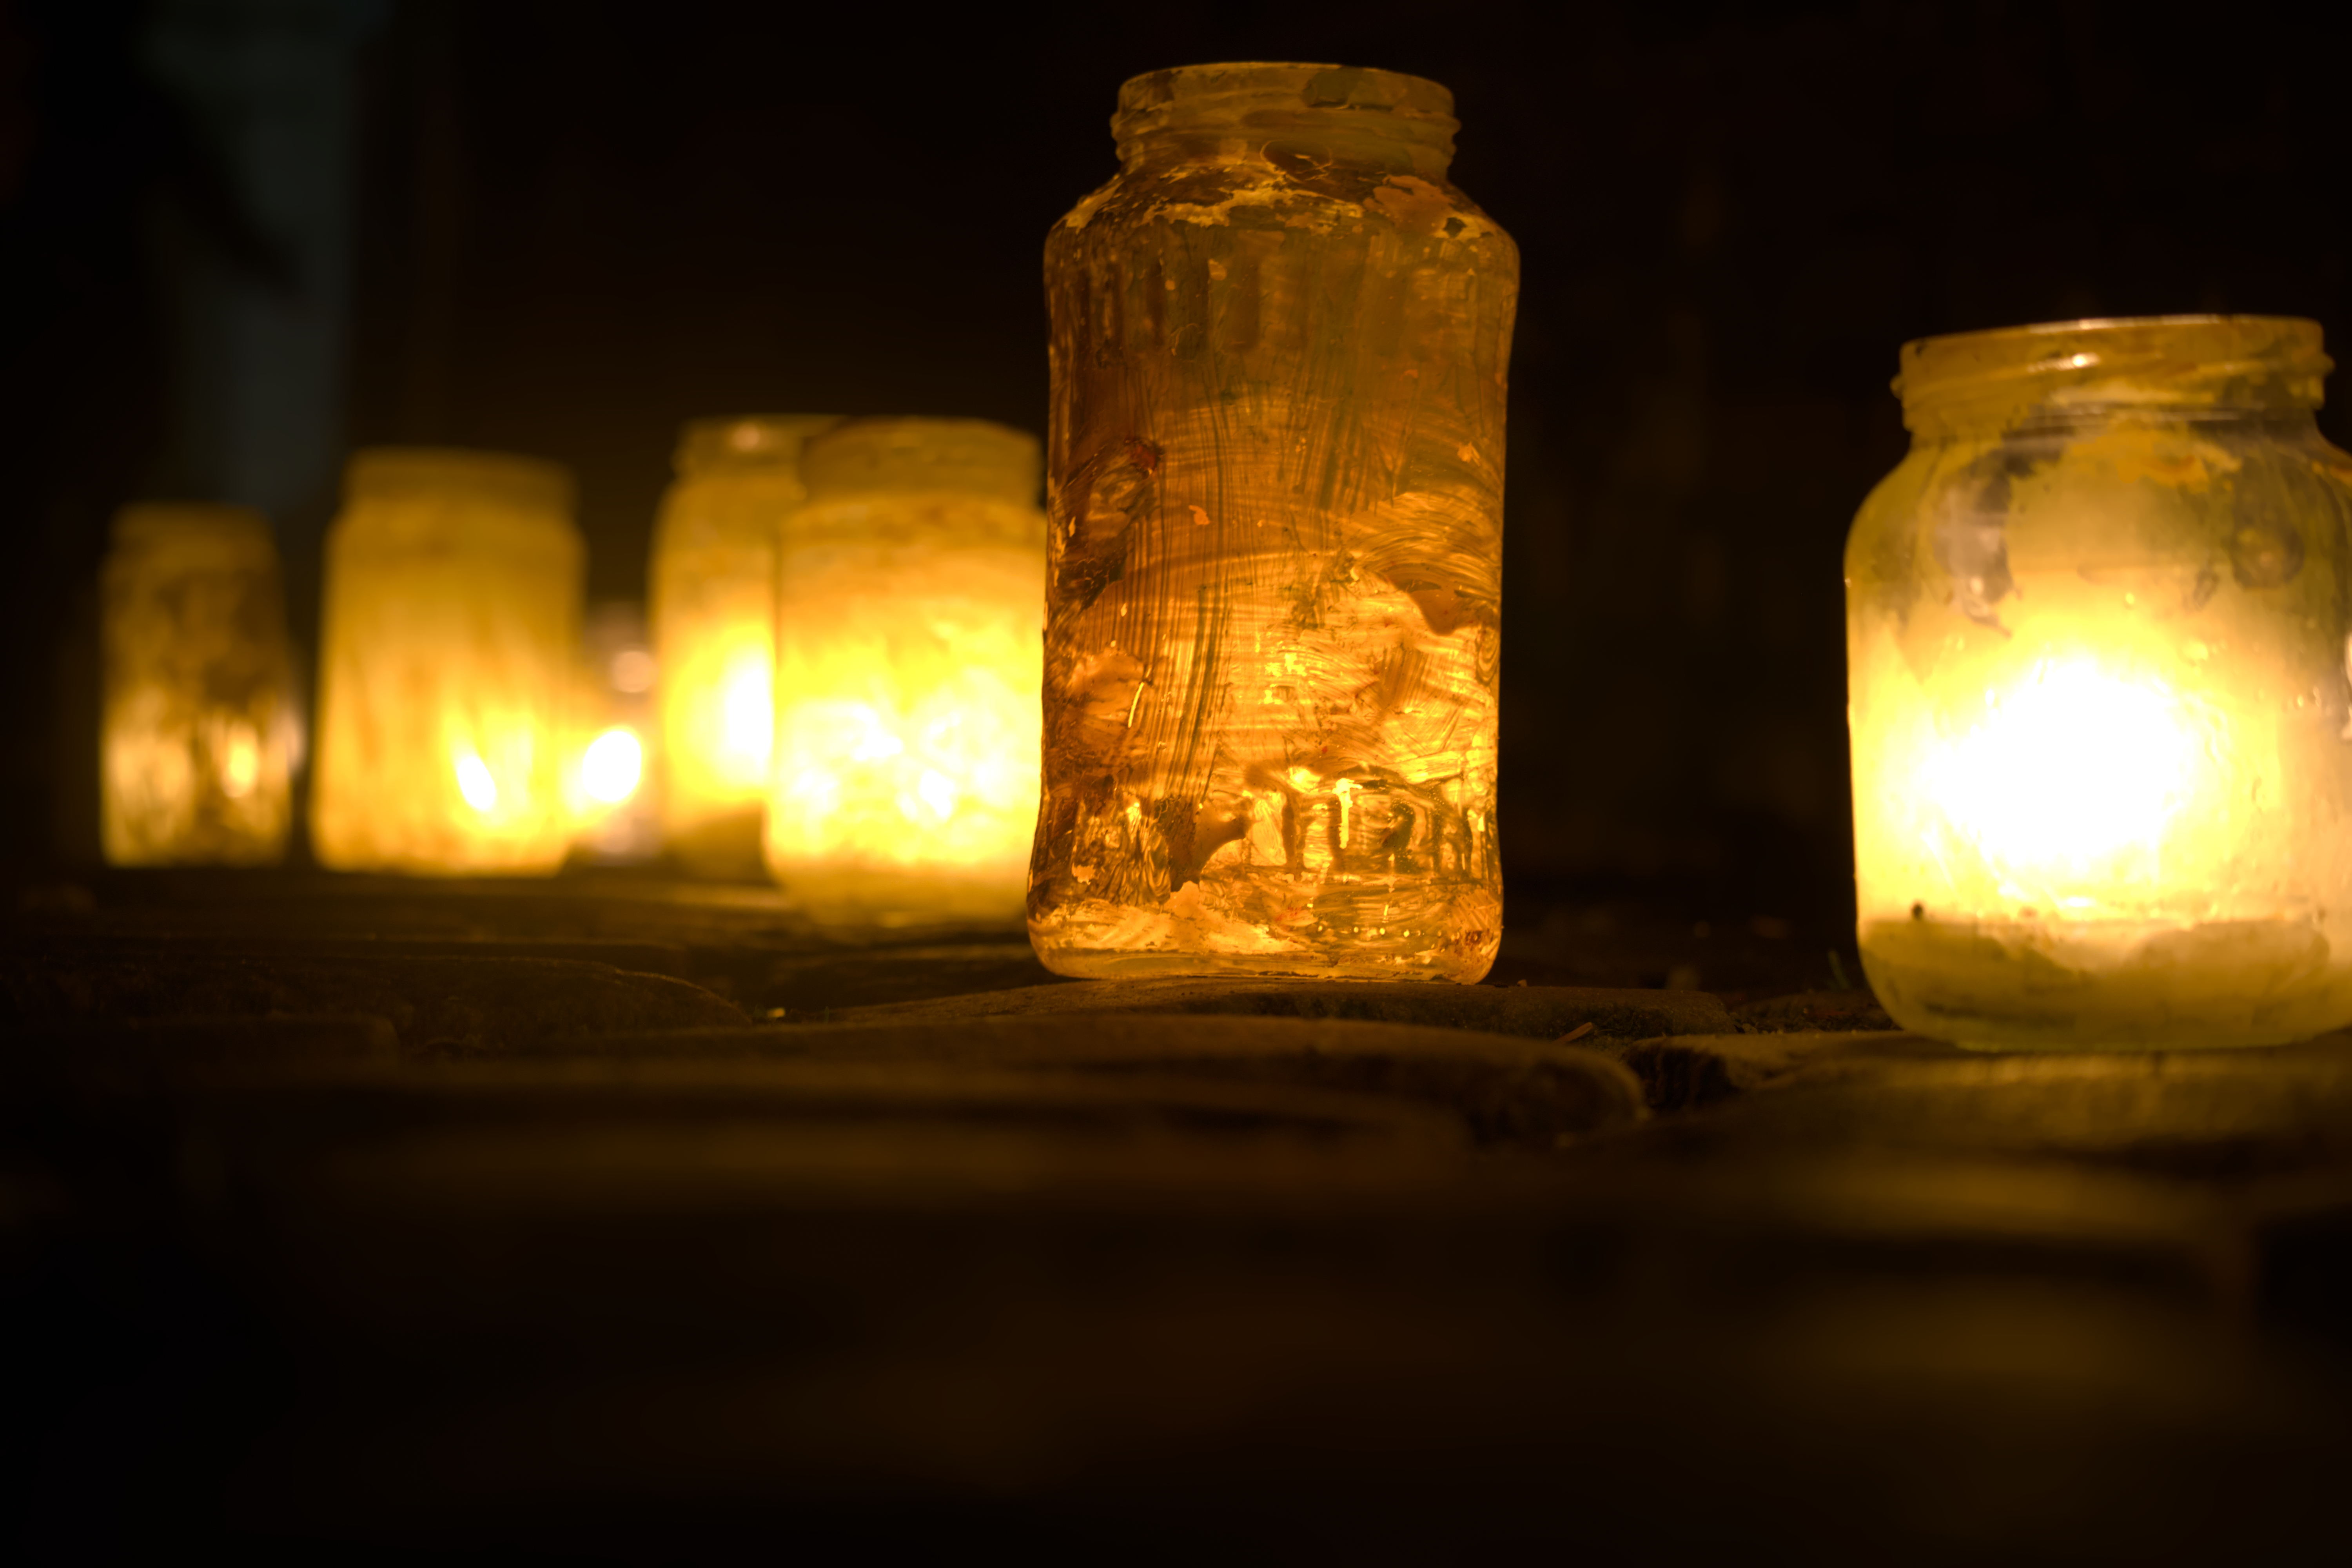 A orange/brownish painted glass, containing a candle, glowing onto a cobblestone pavement. More glasses in the bokeh.